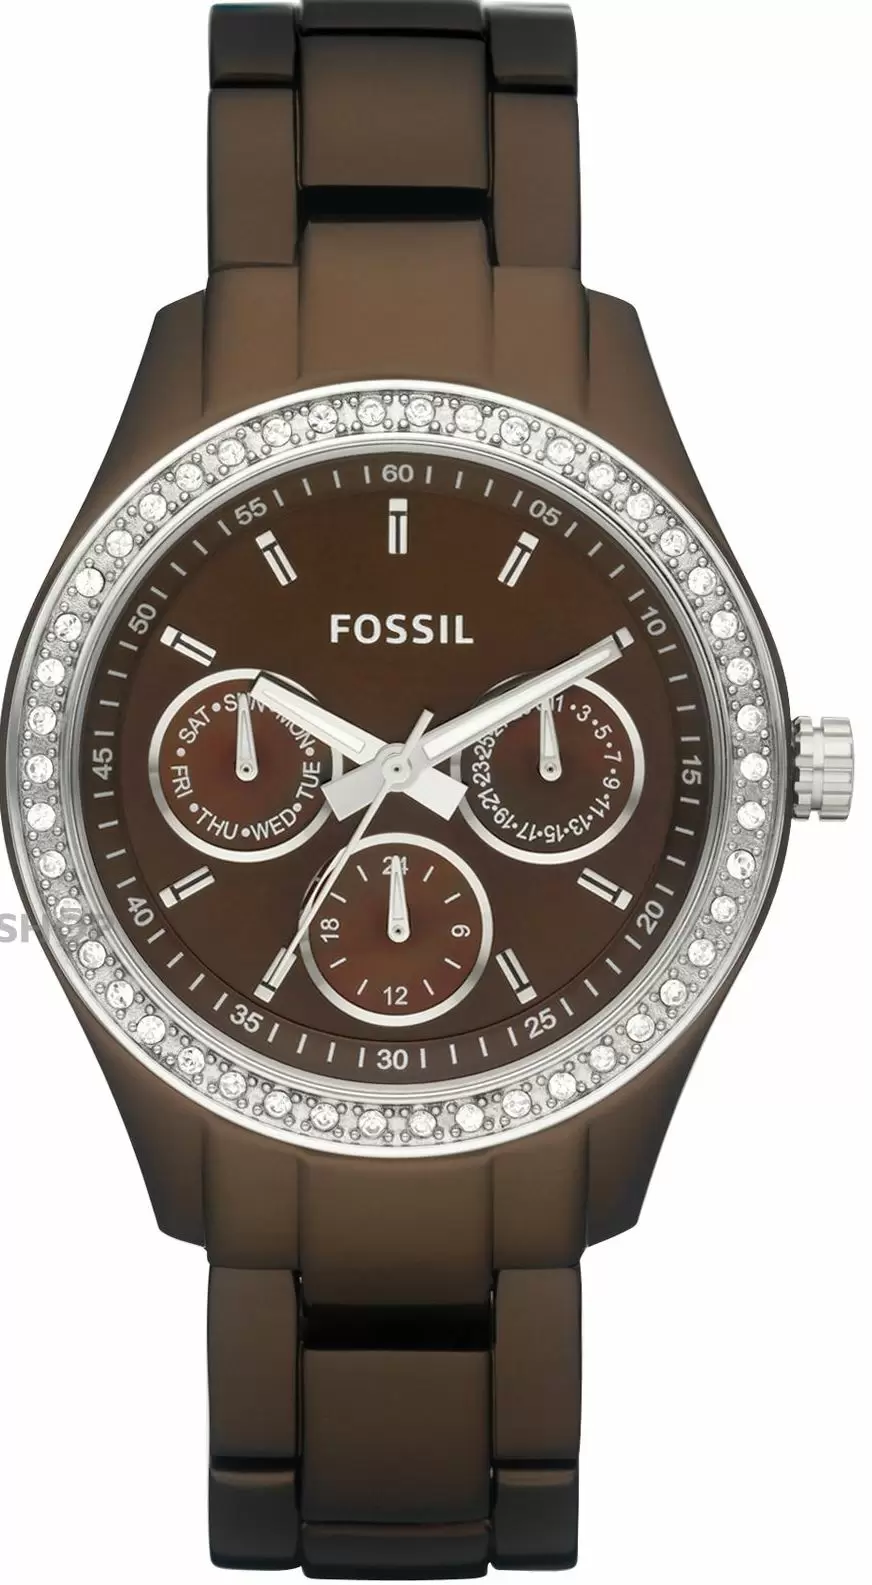 Fossil ES2949 Price in Pakistan, Specifications, Features, Reviews ...